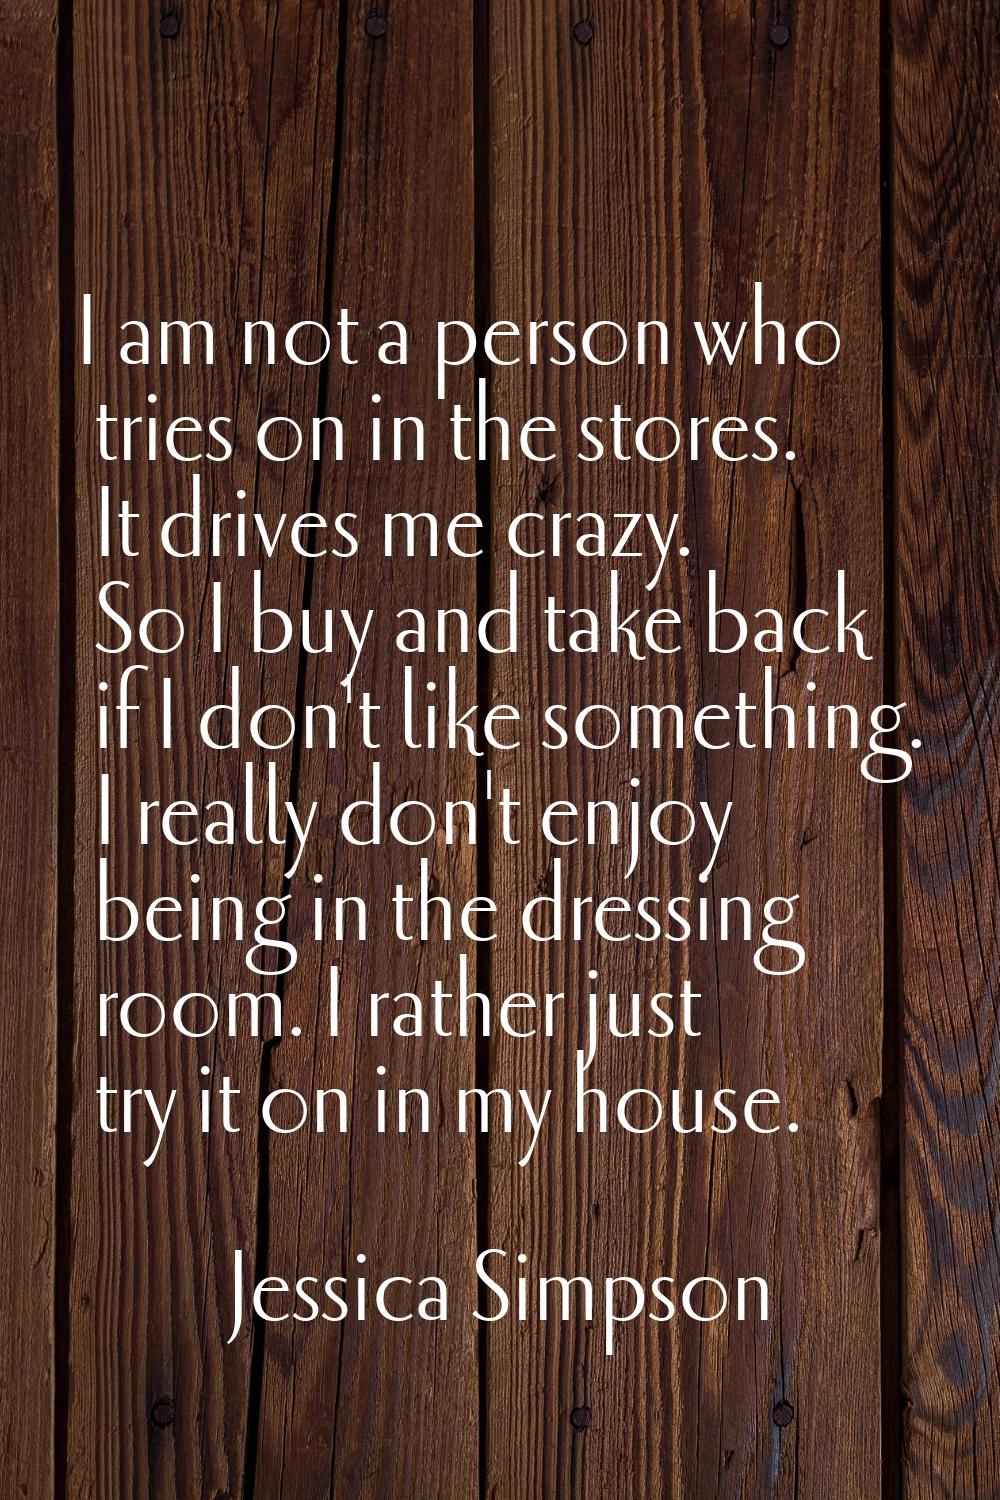 I am not a person who tries on in the stores. It drives me crazy. So I buy and take back if I don't